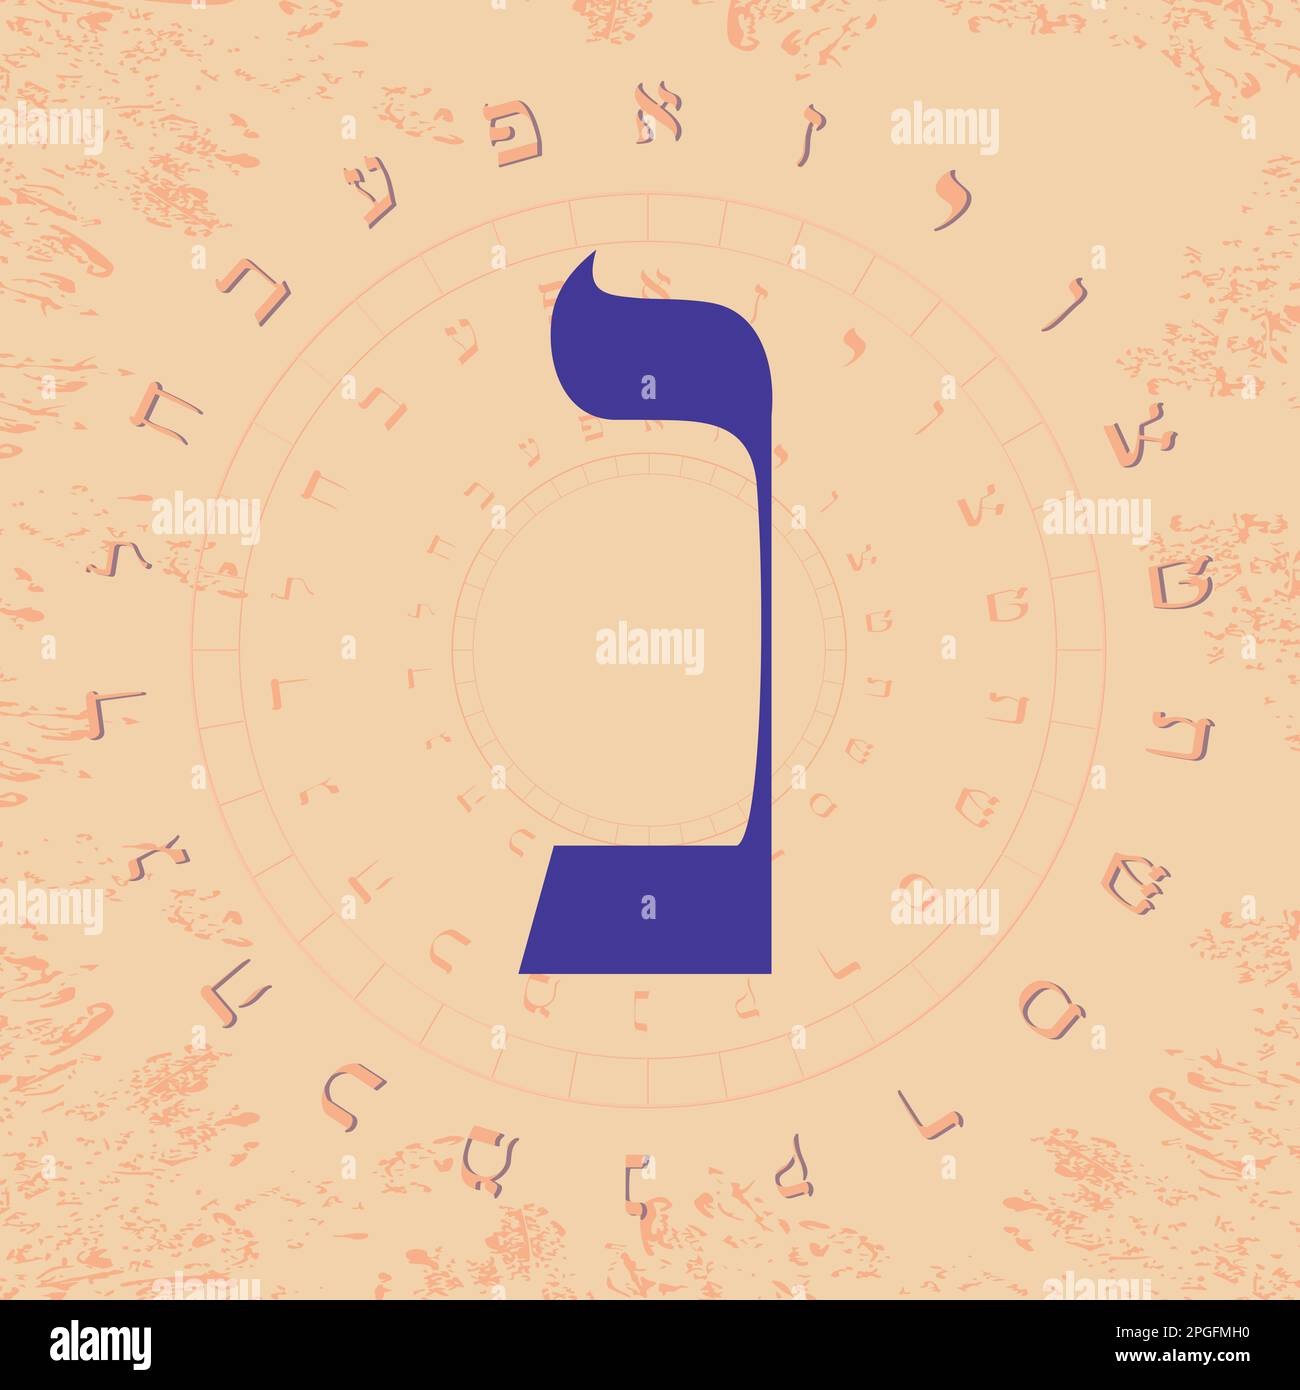 Vector illustration of the Hebrew alphabet in circular design. Hebrew letter called Nun large and blue. Stock Vector